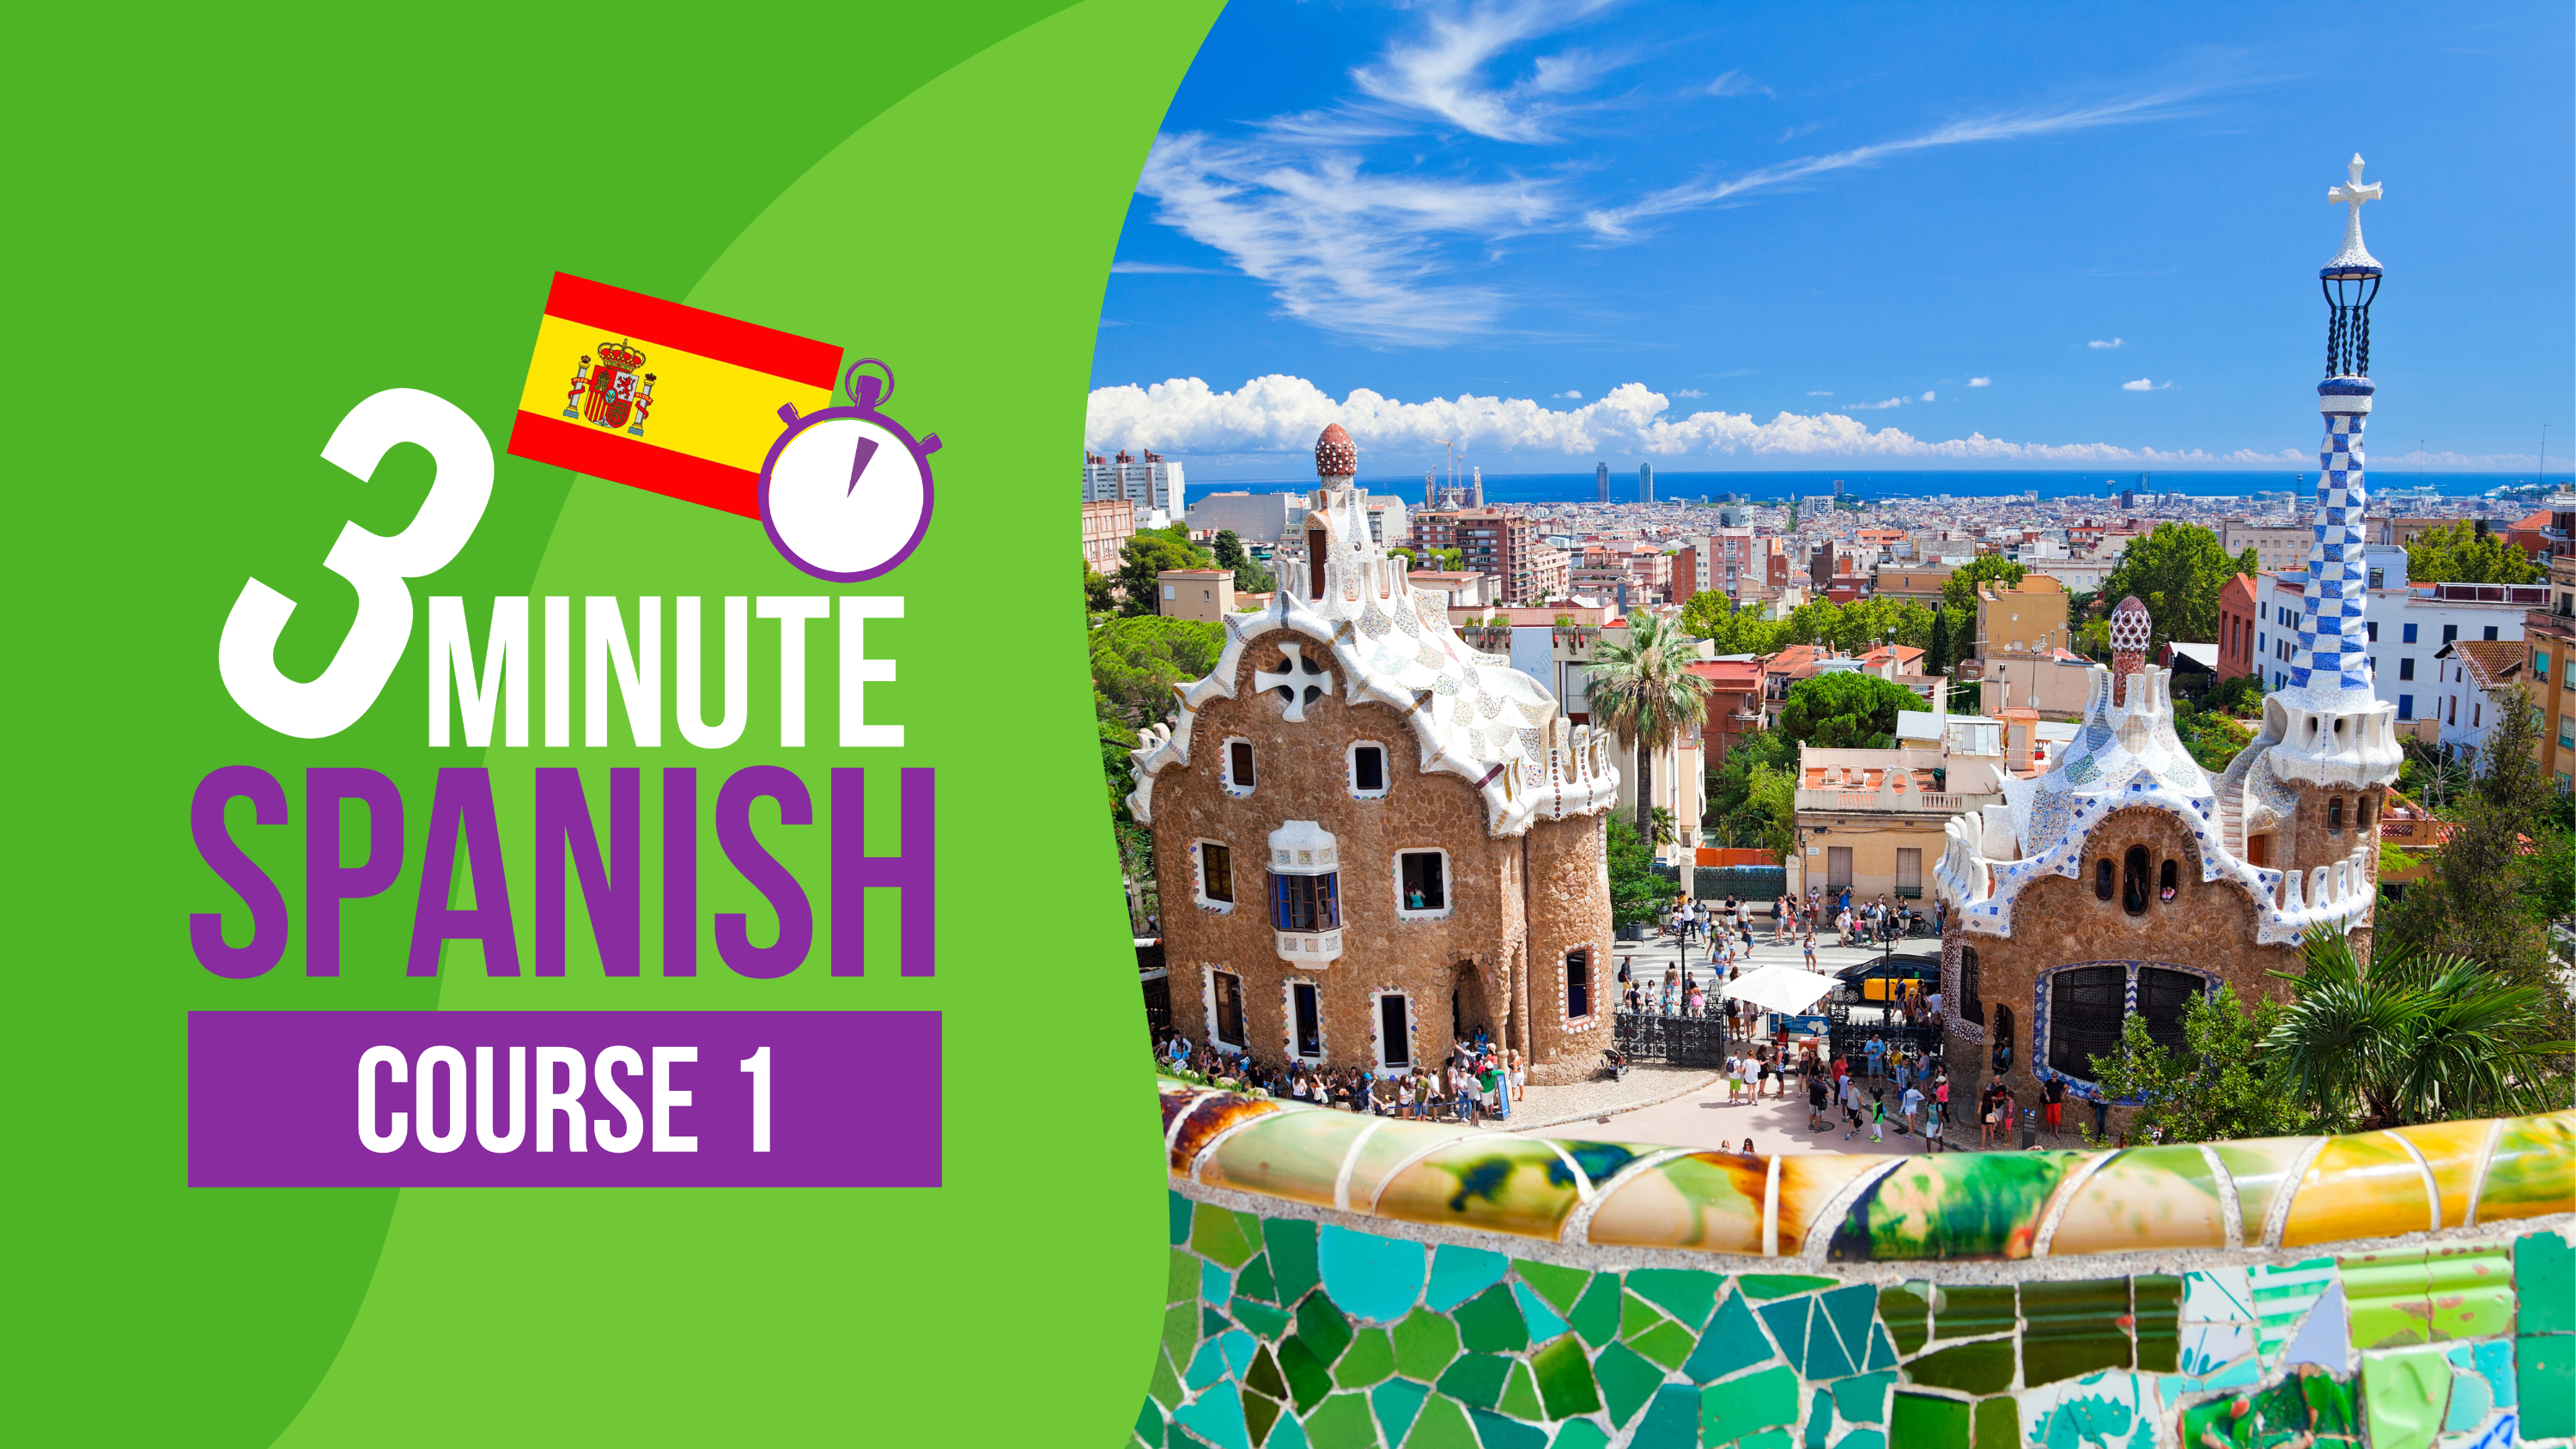 3 Minute Spanish - Course 1